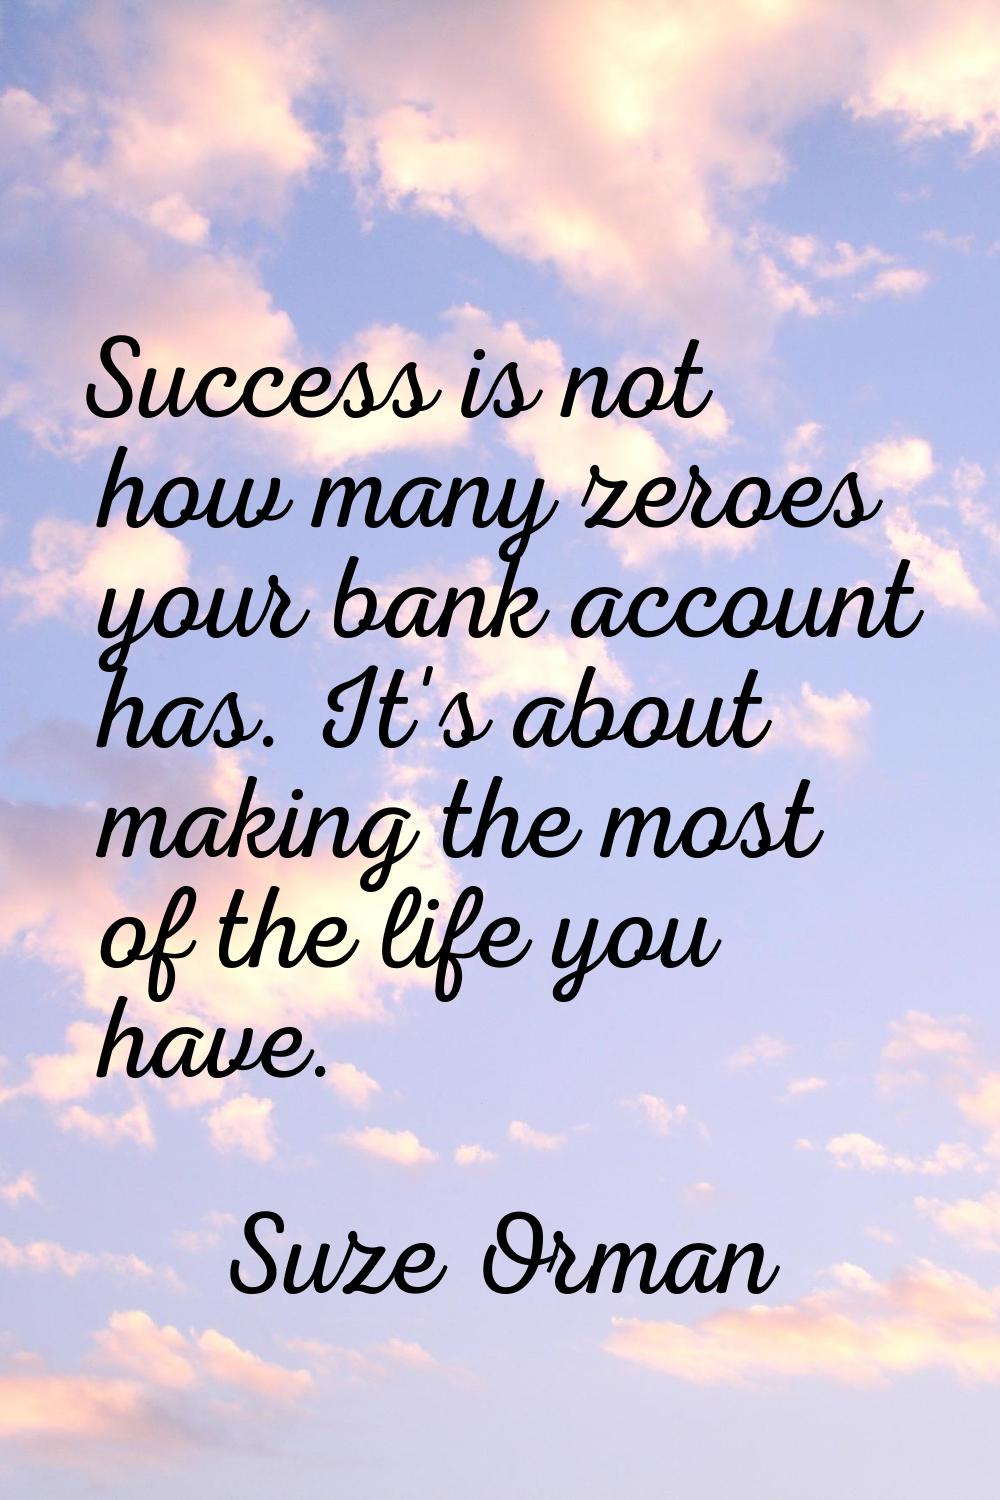 Success is not how many zeroes your bank account has. It's about making the most of the life you ha